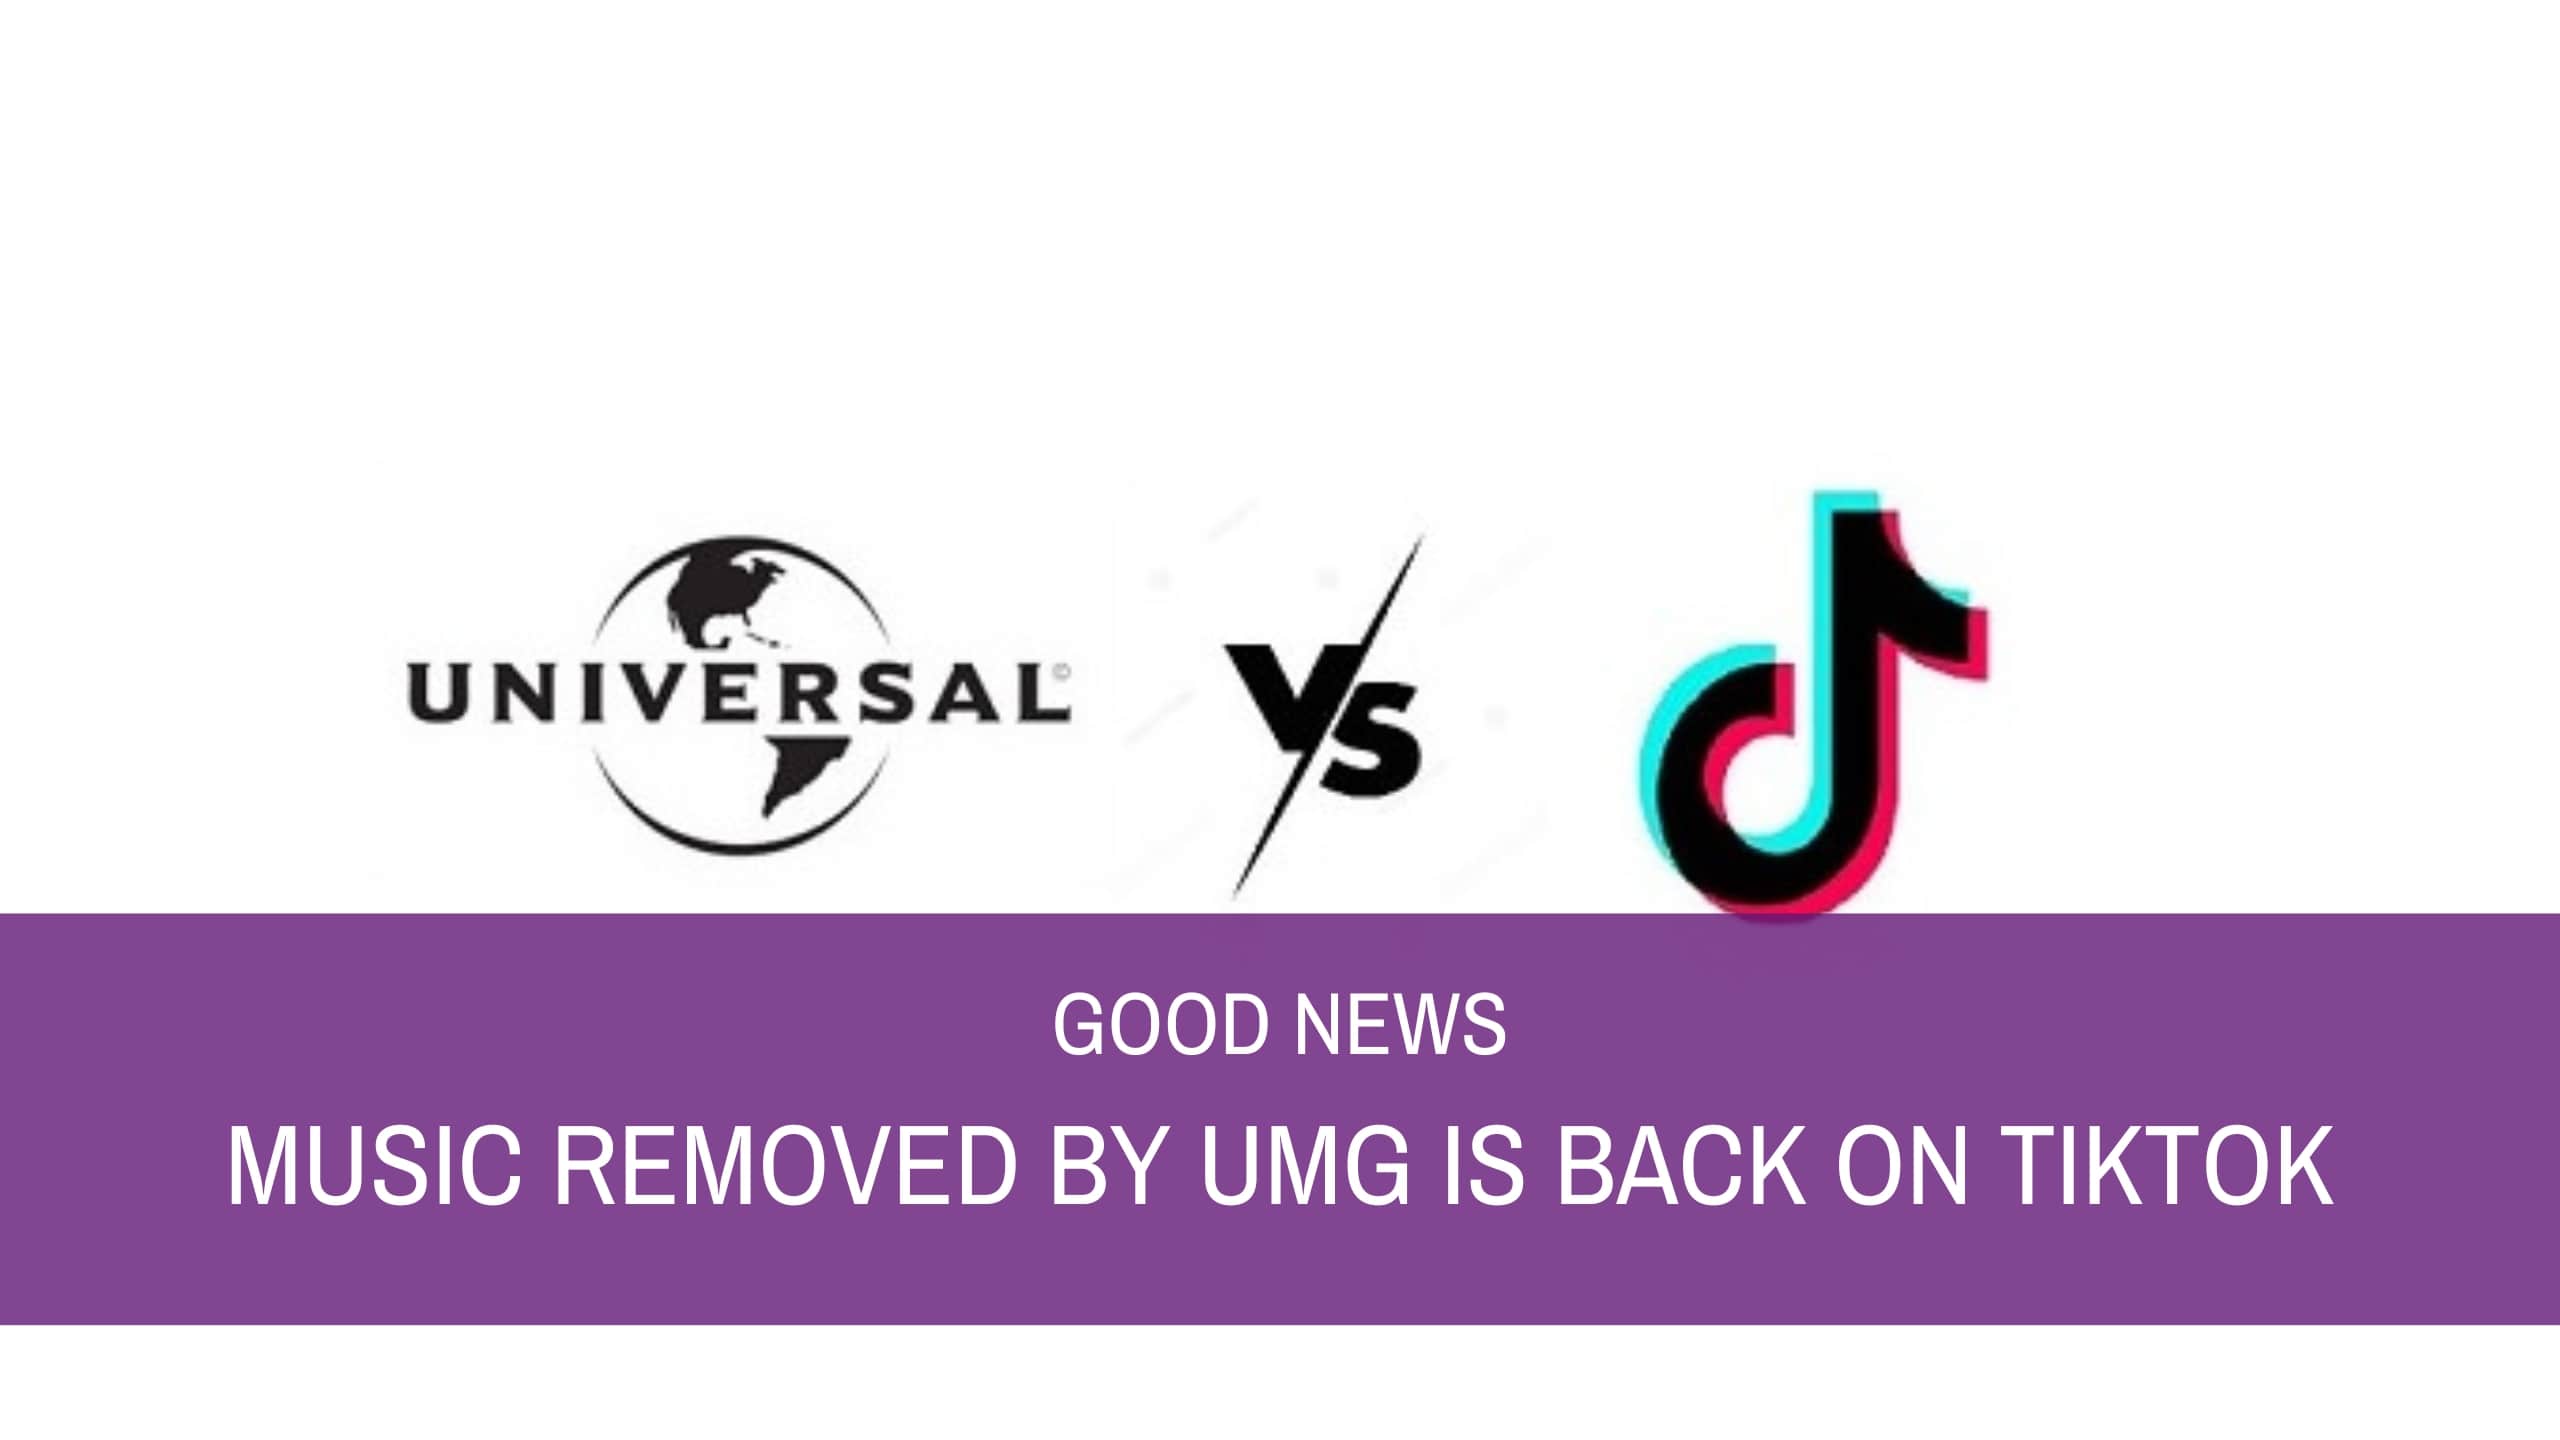 Good News: Music Removed By UMG Is Back On Tiktok